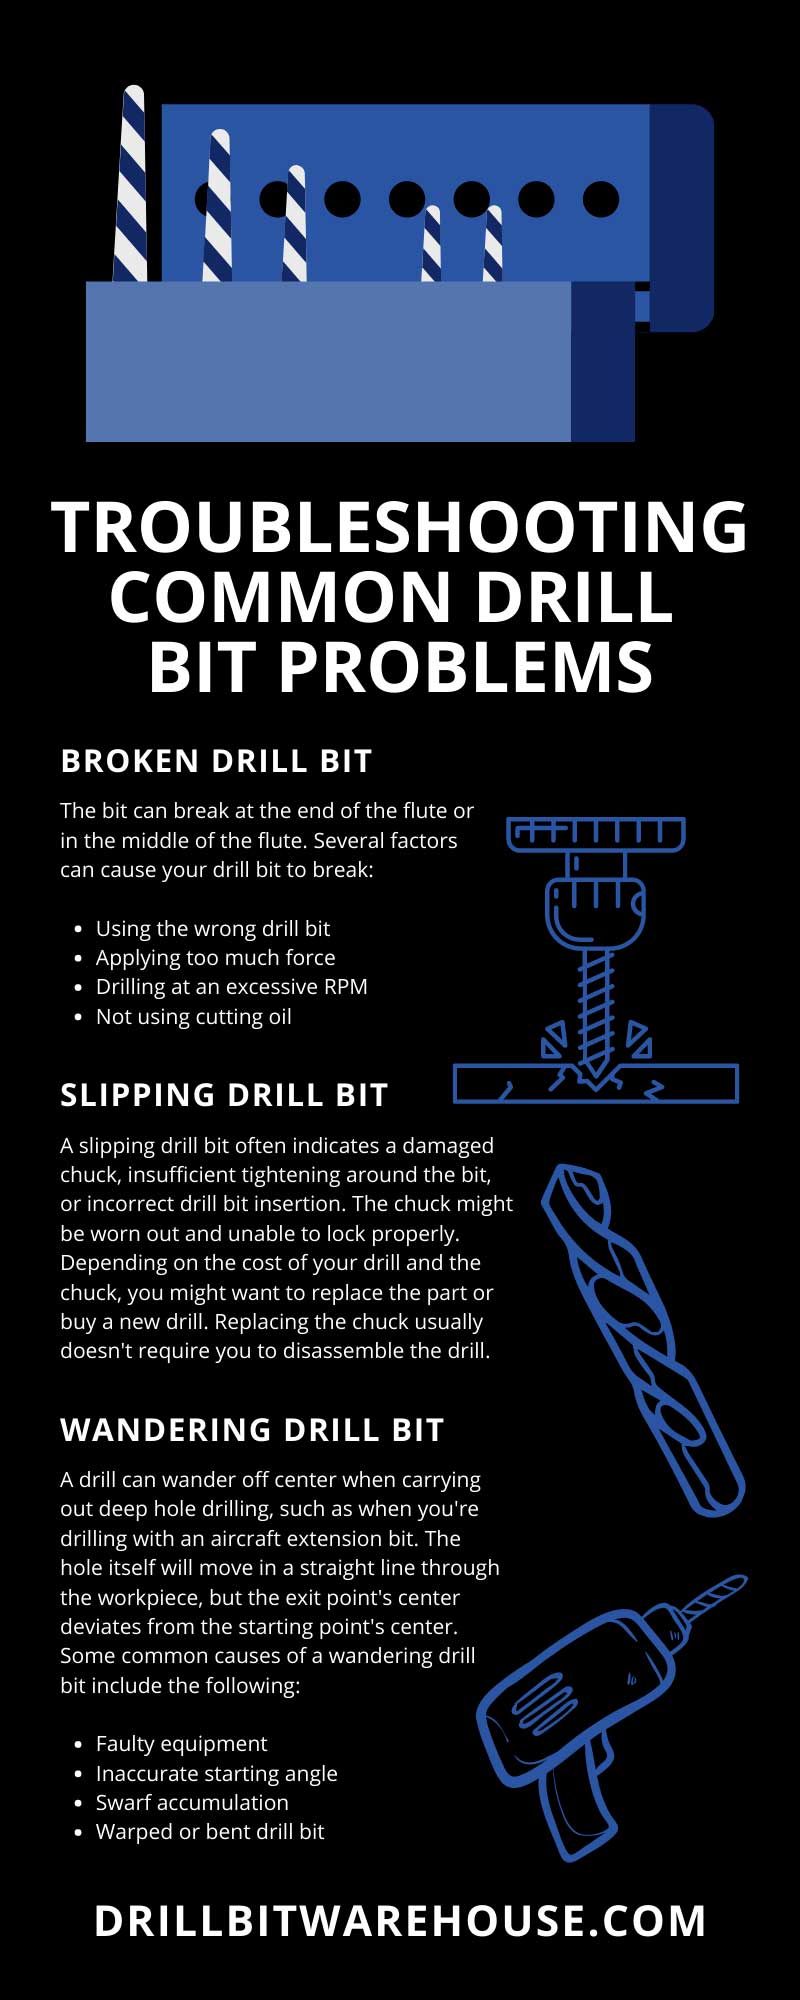 Troubleshooting Common Drill Bit Problems